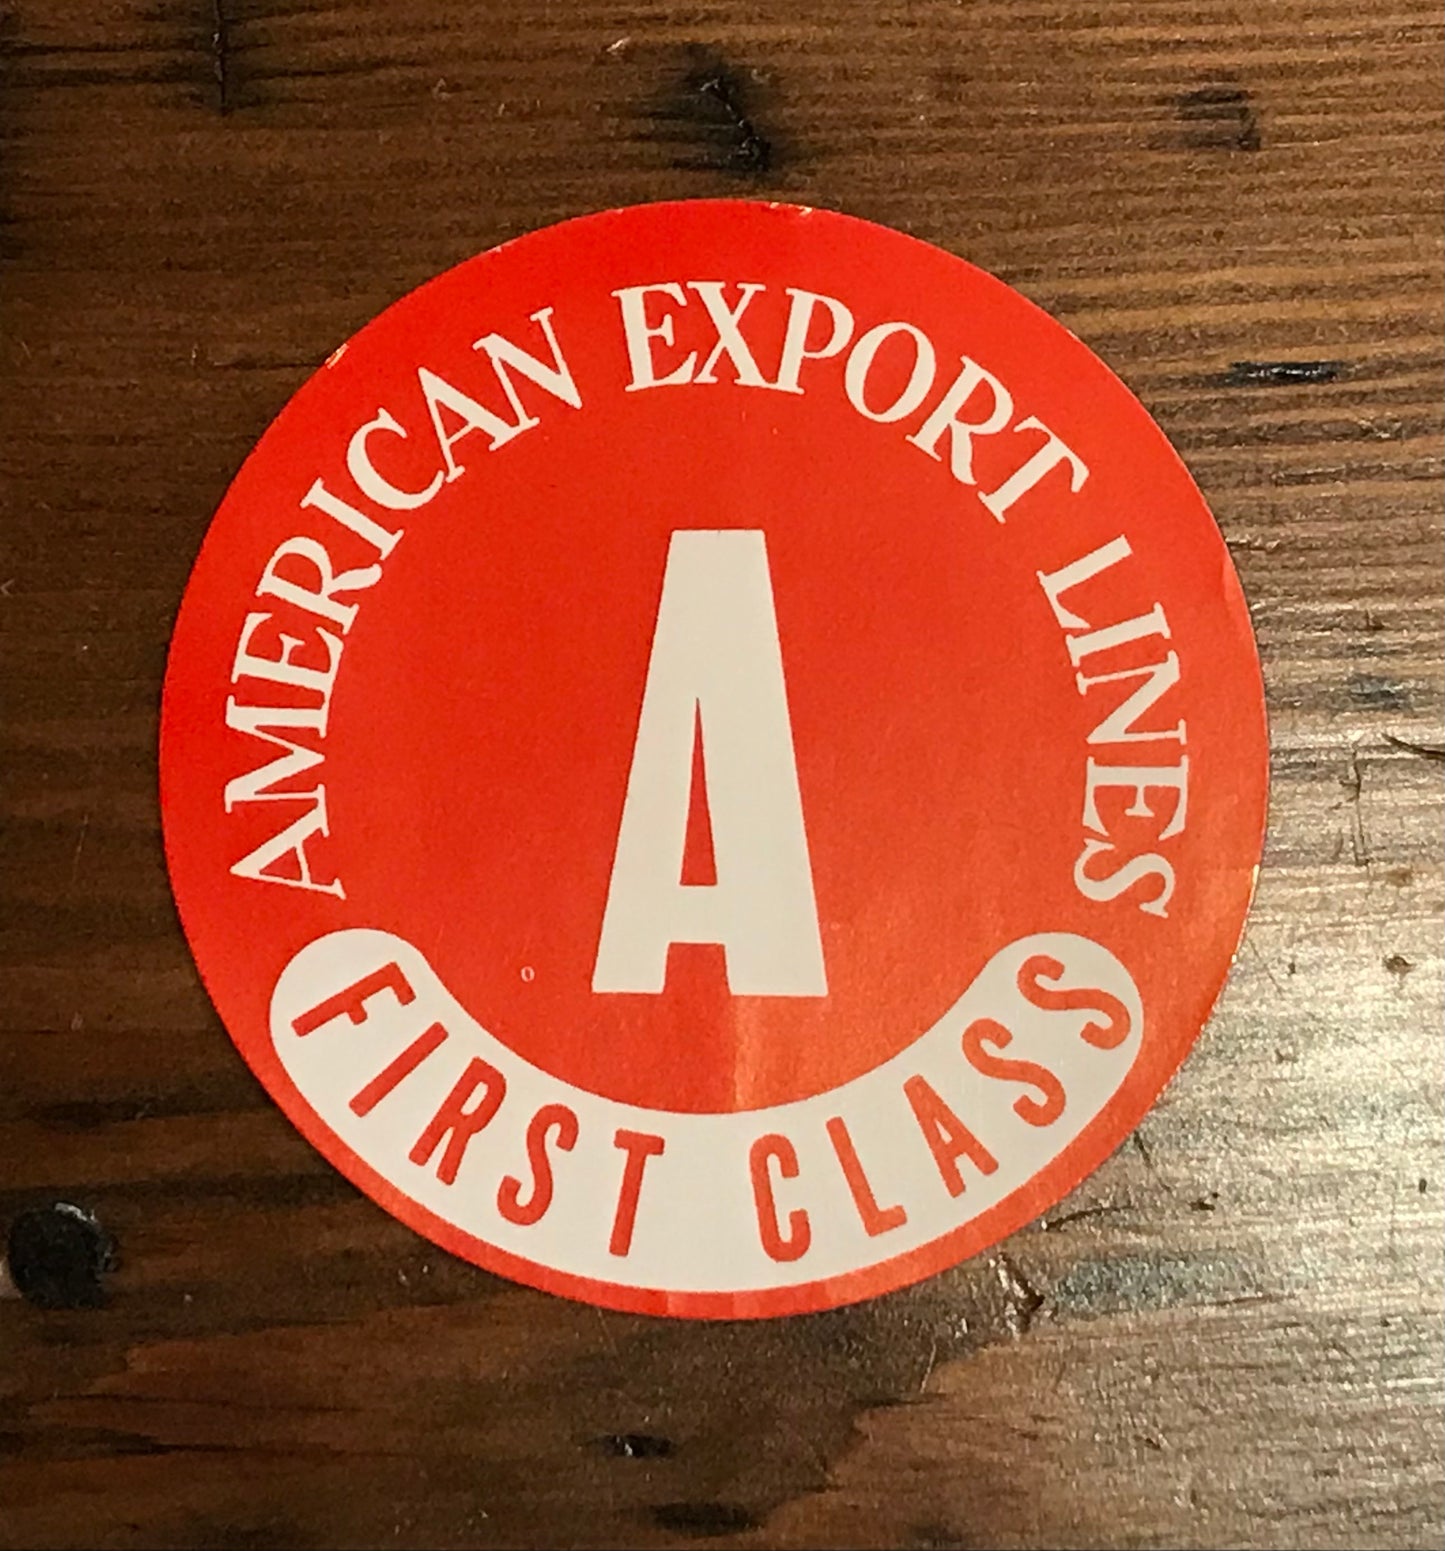 Stickers - American Export Lines First Class, assorted letters